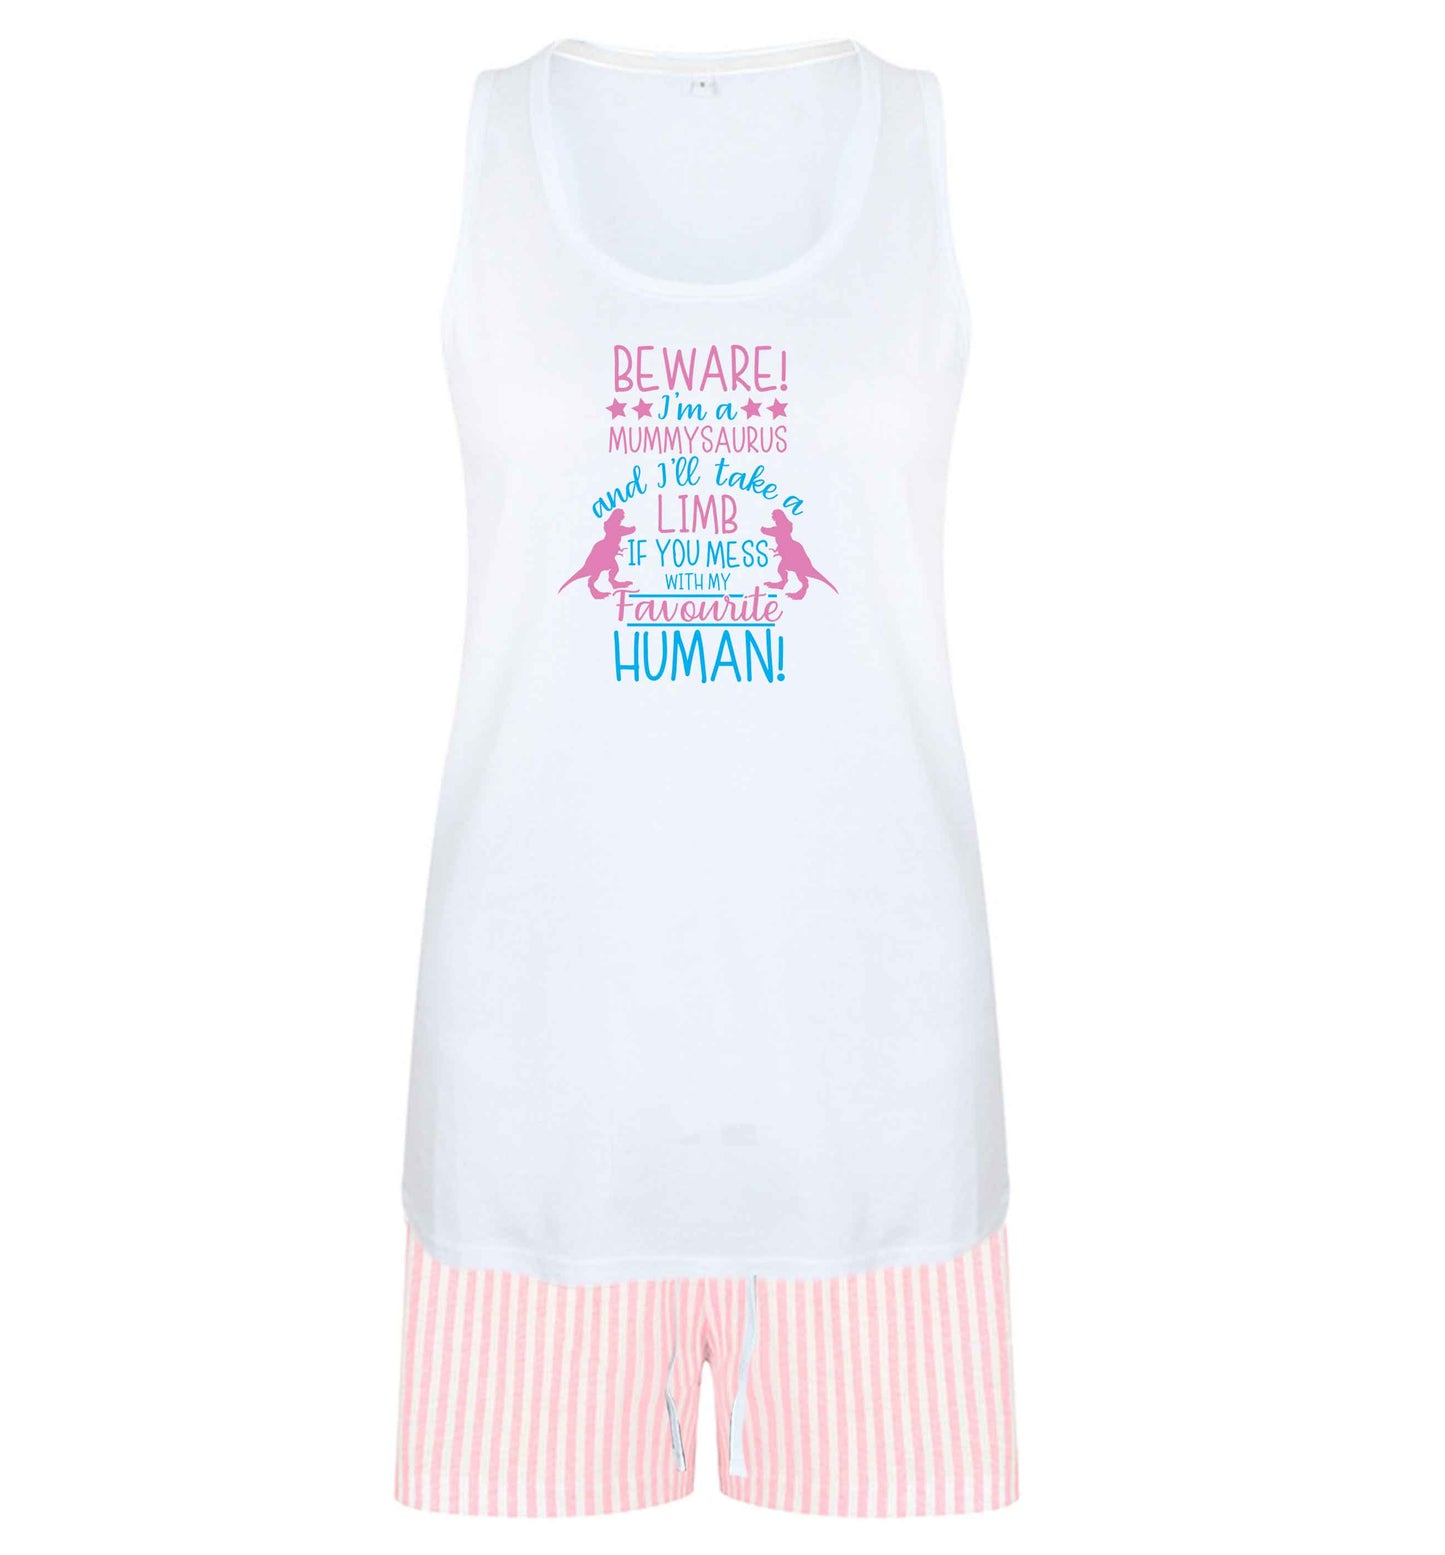 Perfect gift for any protective mummysaurus! Beware I'm a mummysaurus and I'll take a limb if you mess with my favourite human size XL women's pyjama shorts set in pink 